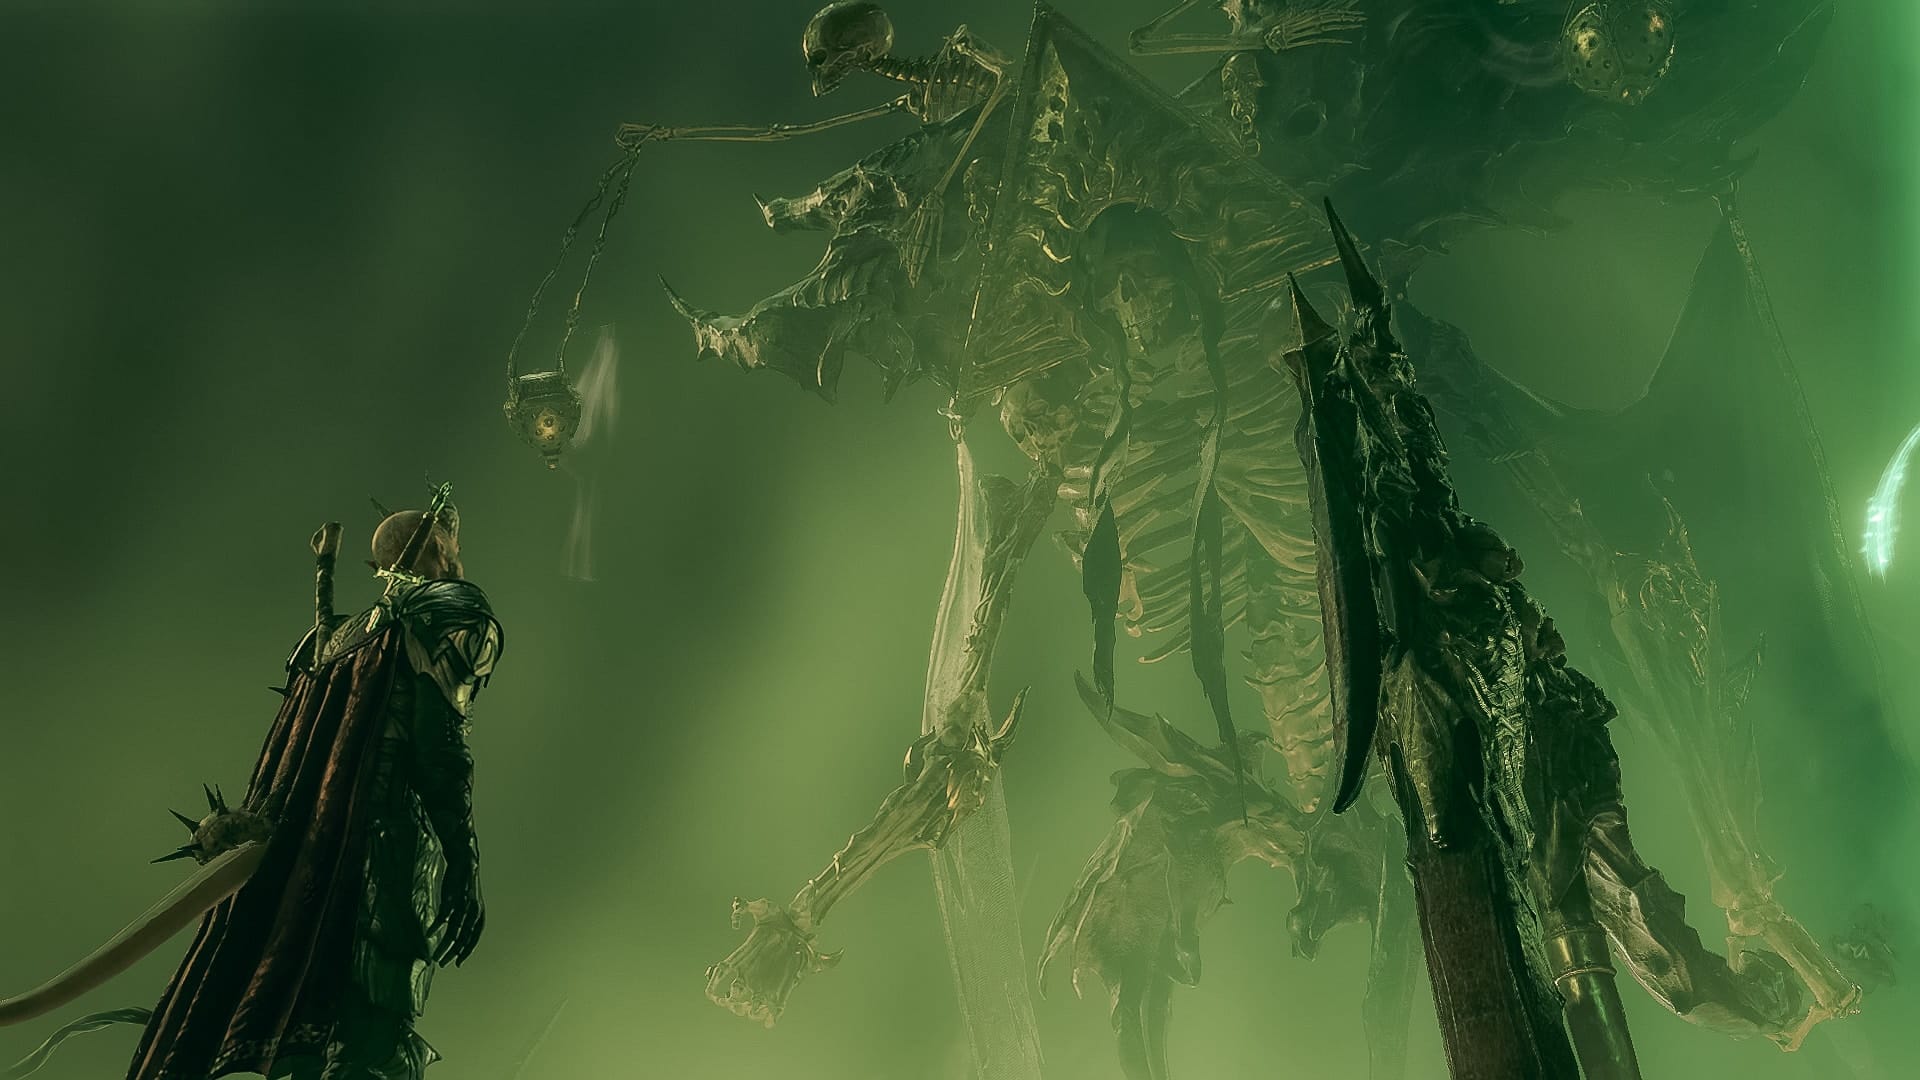 Our hero facing off against a giant creature.